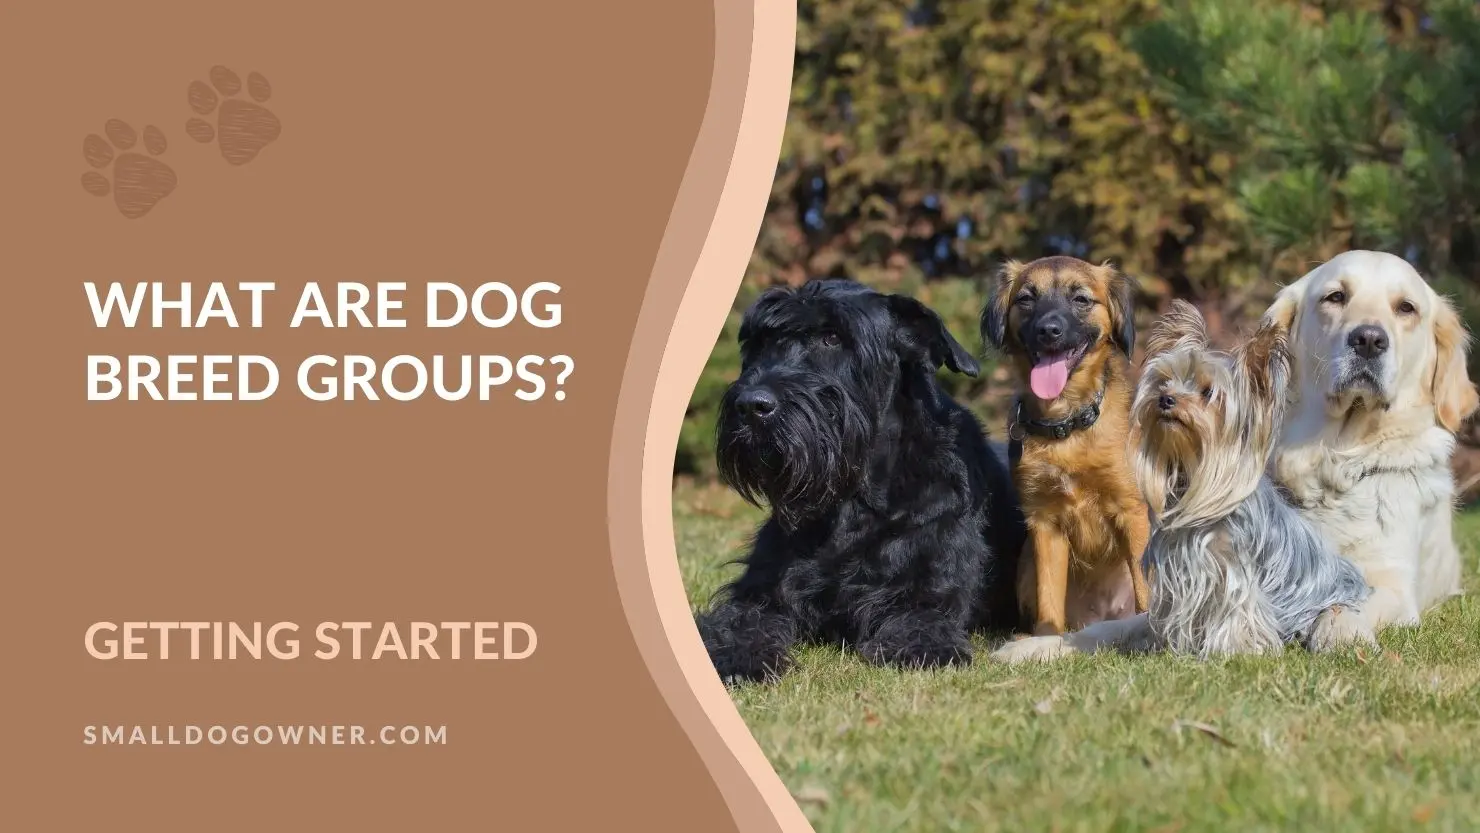 What are dog breed groups?